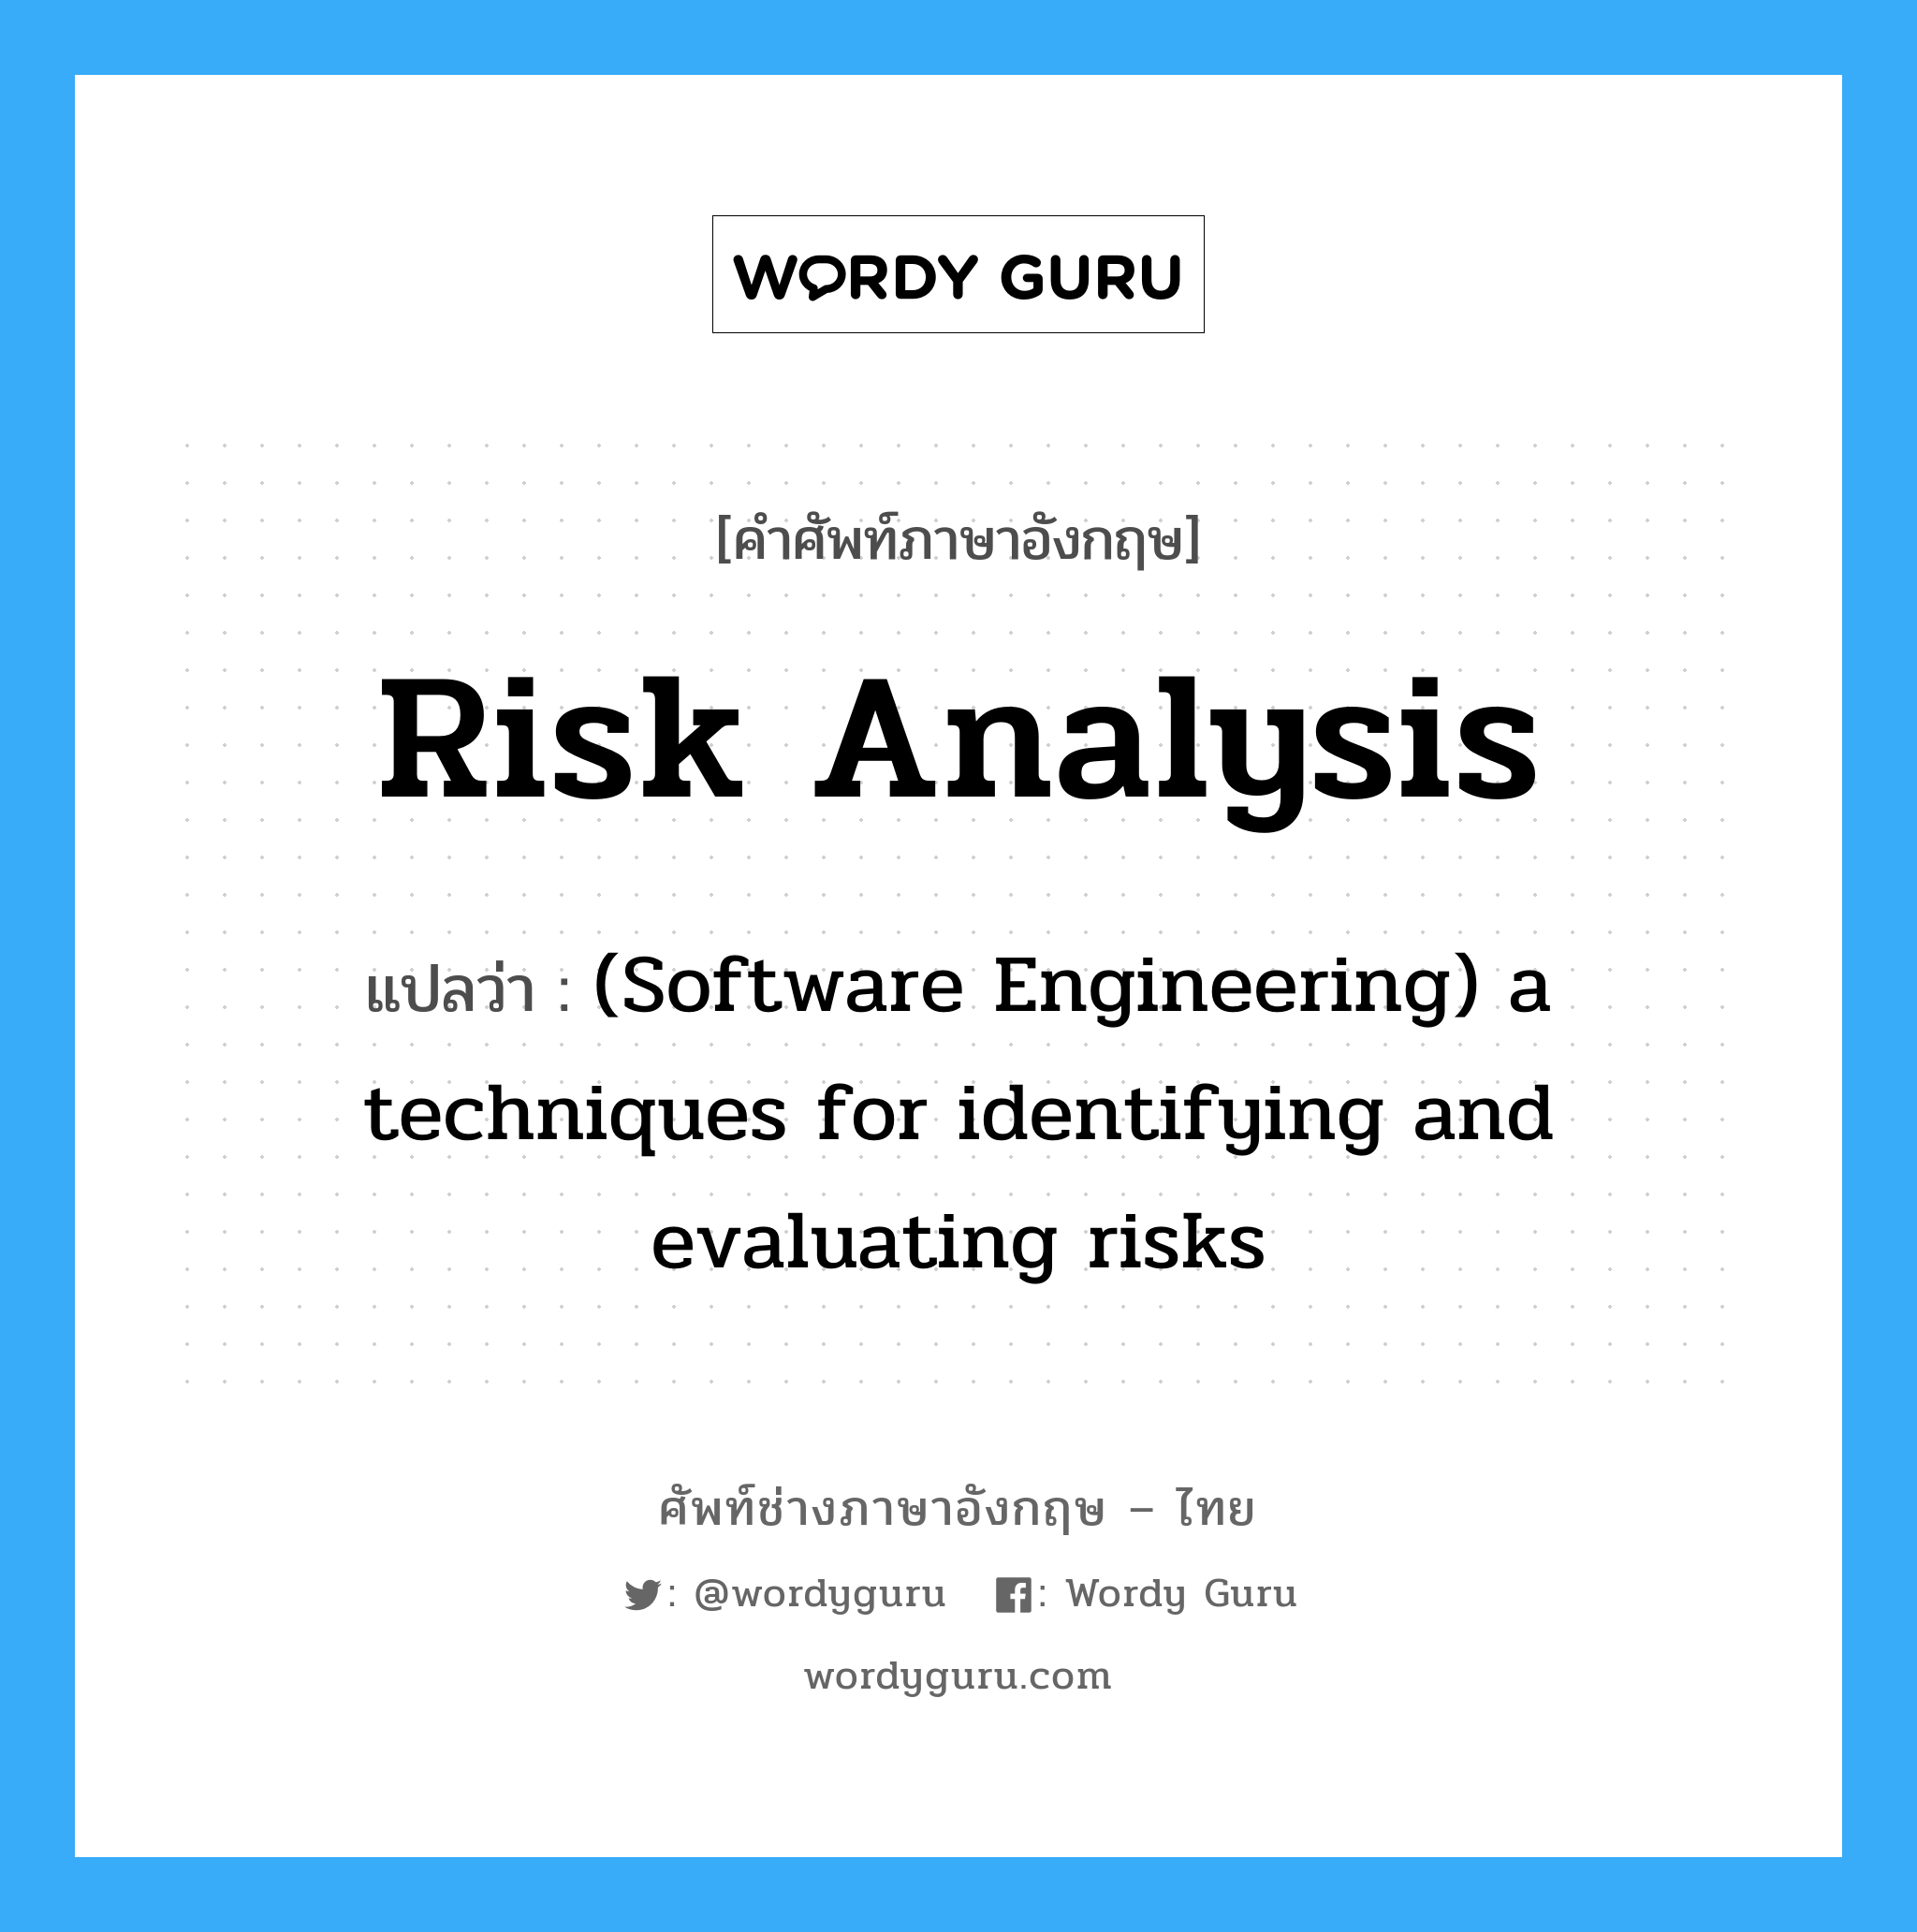 (Software Engineering) a techniques for identifying and evaluating risks ภาษาอังกฤษ?, คำศัพท์ช่างภาษาอังกฤษ - ไทย (Software Engineering) a techniques for identifying and evaluating risks คำศัพท์ภาษาอังกฤษ (Software Engineering) a techniques for identifying and evaluating risks แปลว่า Risk analysis